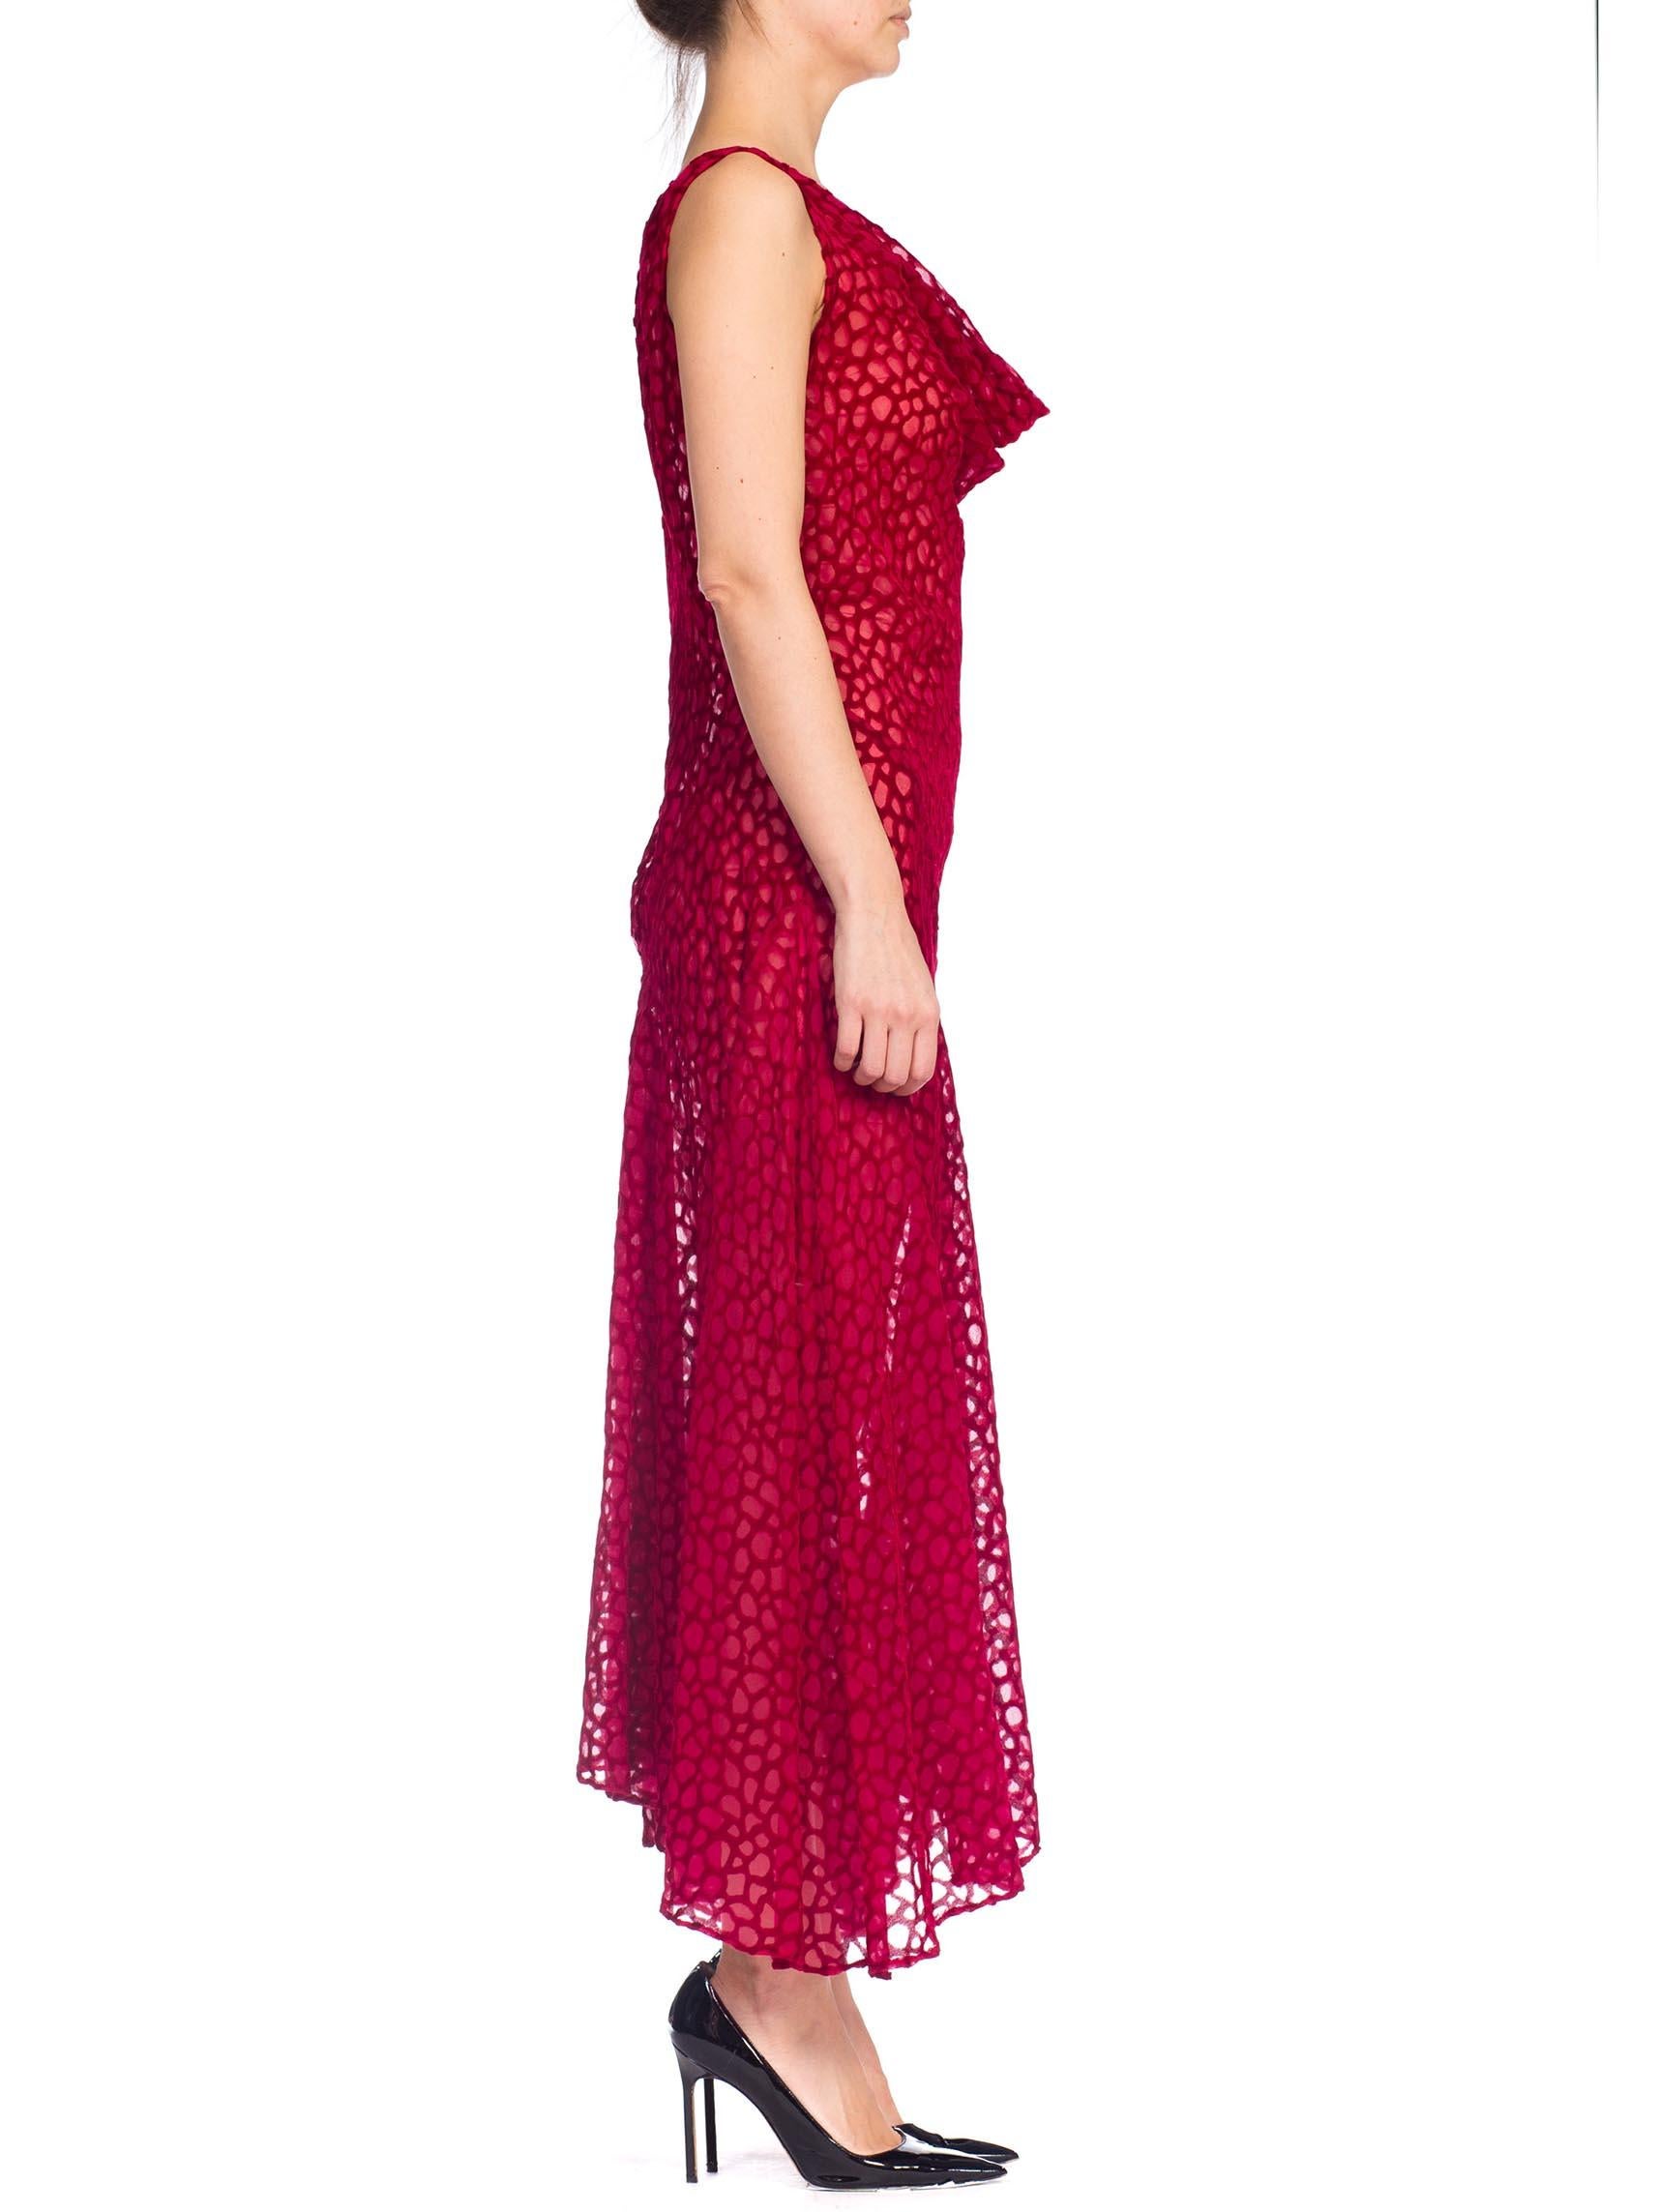 1990S JOHN GALLIANO Style Cranberry Red Bias Cut Rayon Blend Burnout Velvet Gown 1